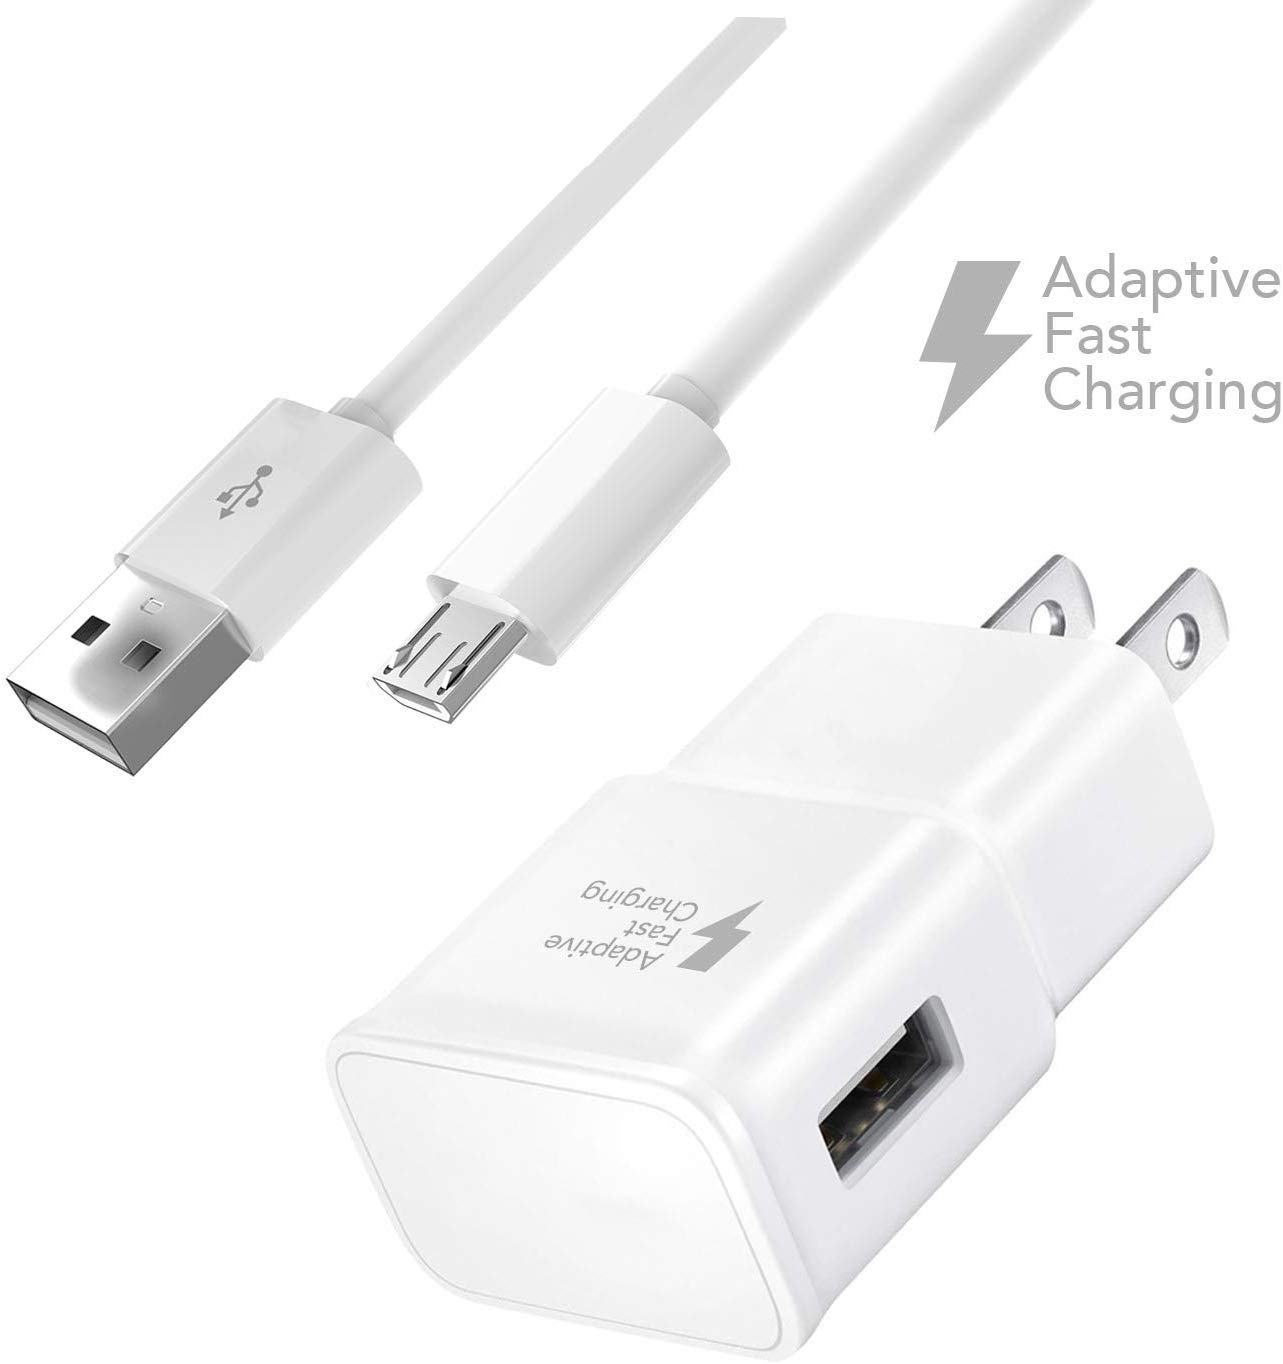 Samsung Galaxy S2, S3, S4, and {GALAXY NOTE 4} Truwire & Trupower Micro USB Home Travel Charger Cable Cord 3 Ft (1M) and Home Adapter for Samsung Galaxy S II/2 Skyrocket HD, Galaxy S Aviator, Galaxy S - image 1 of 8